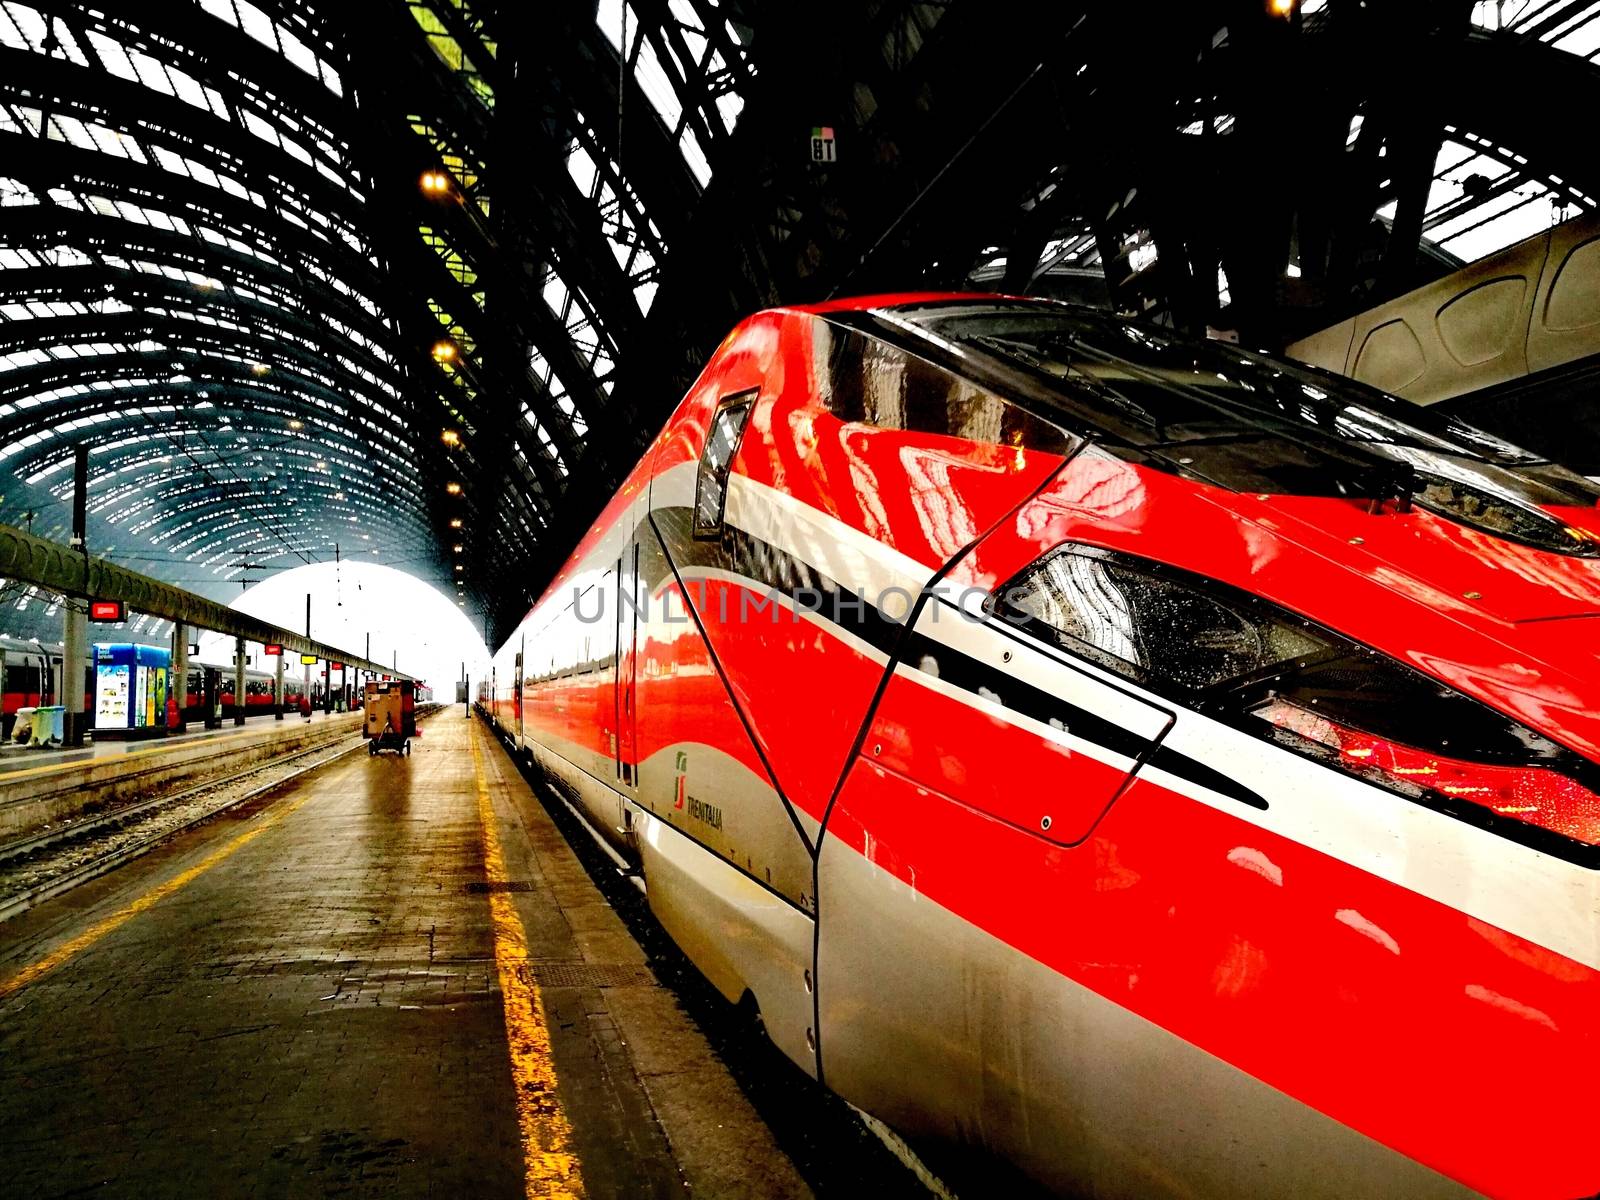 Red High Speed Train in Milan Central Station by EnricoMiglnoPhotography